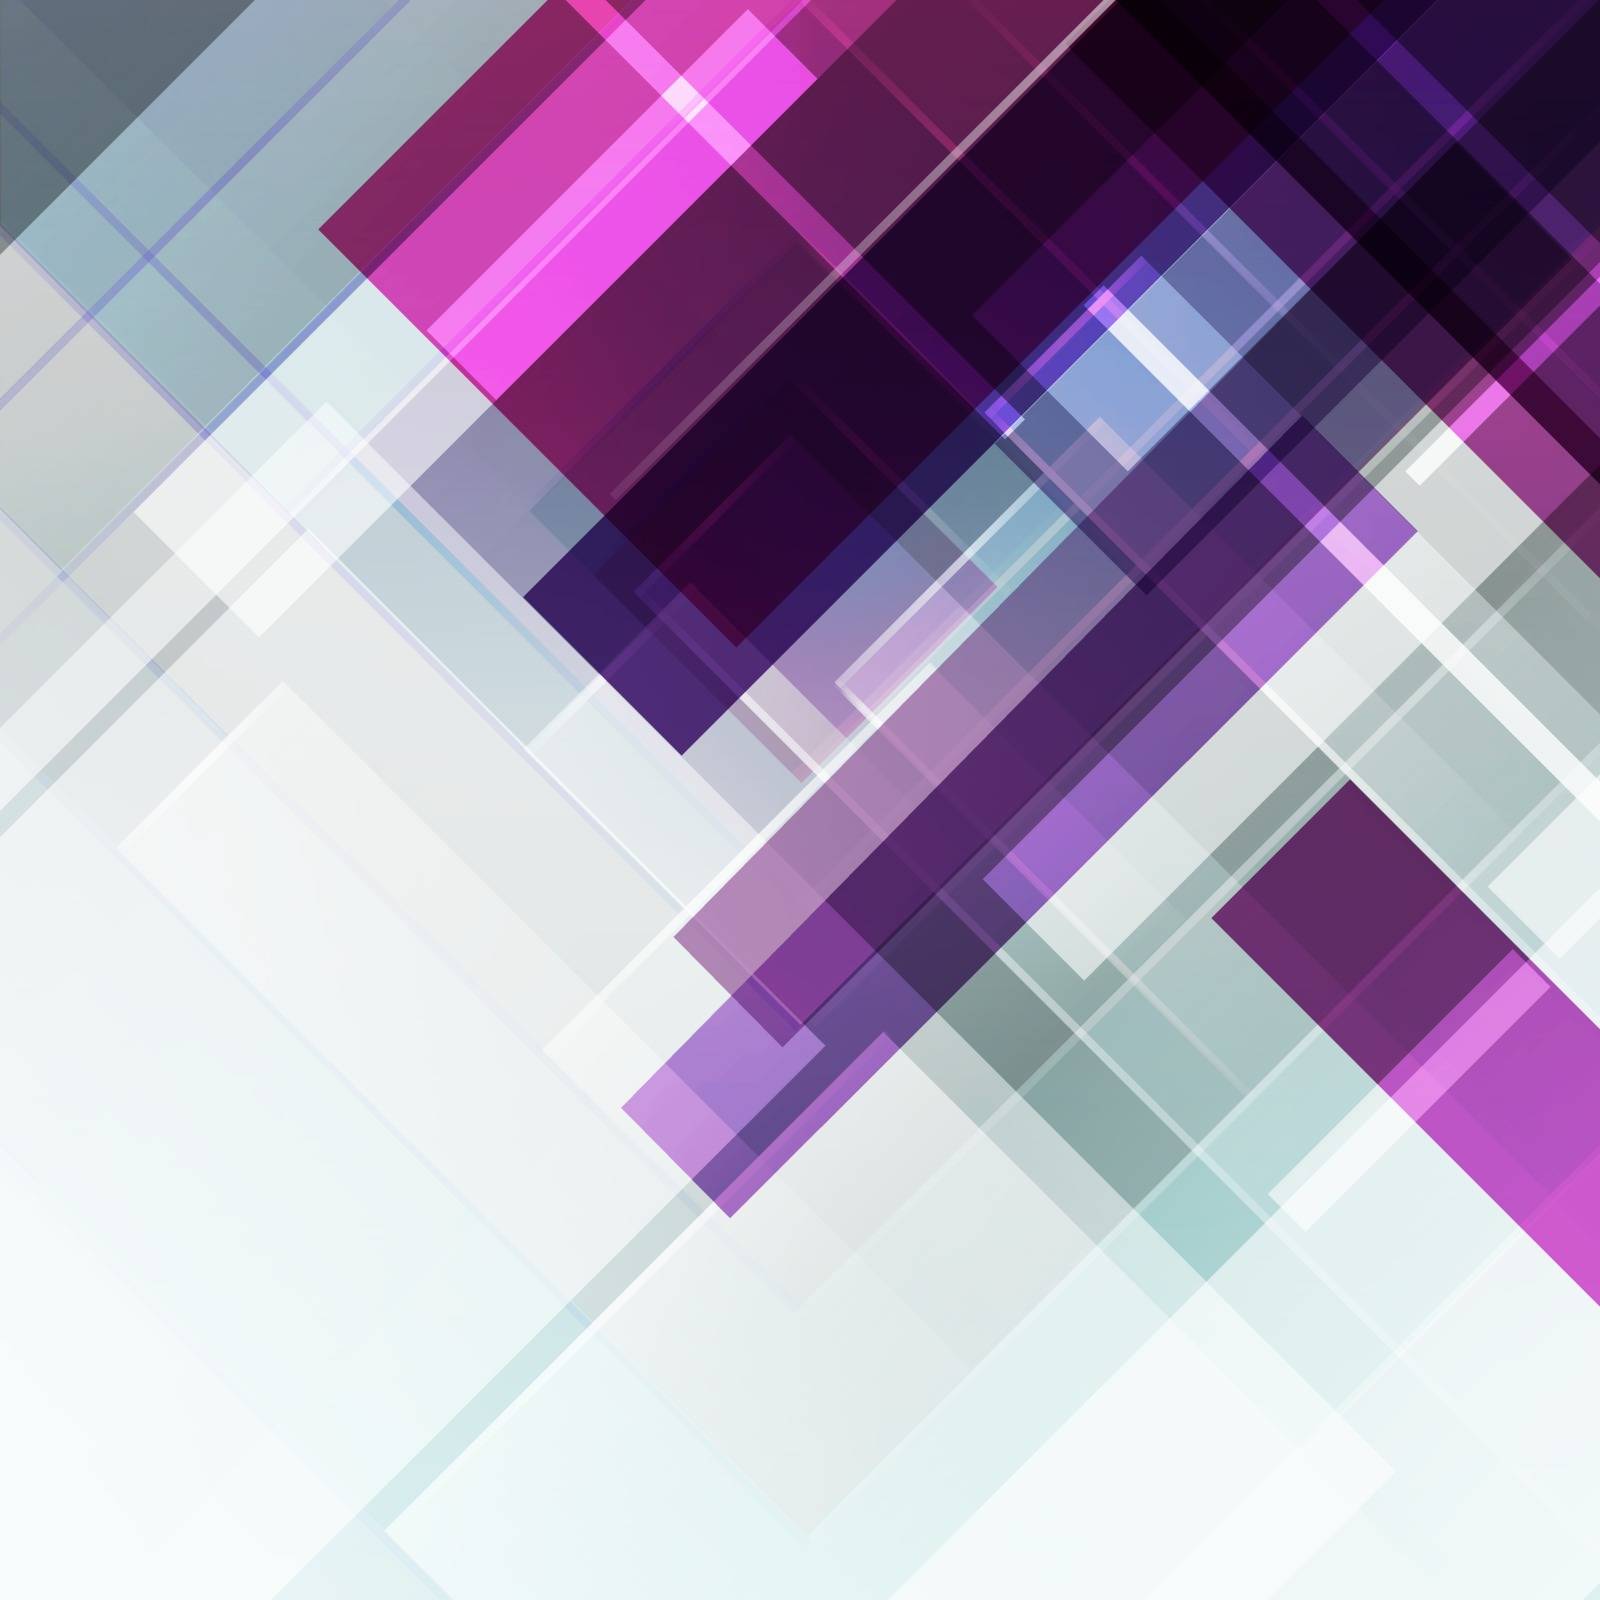 Abstract geometric violet background by nolimit046